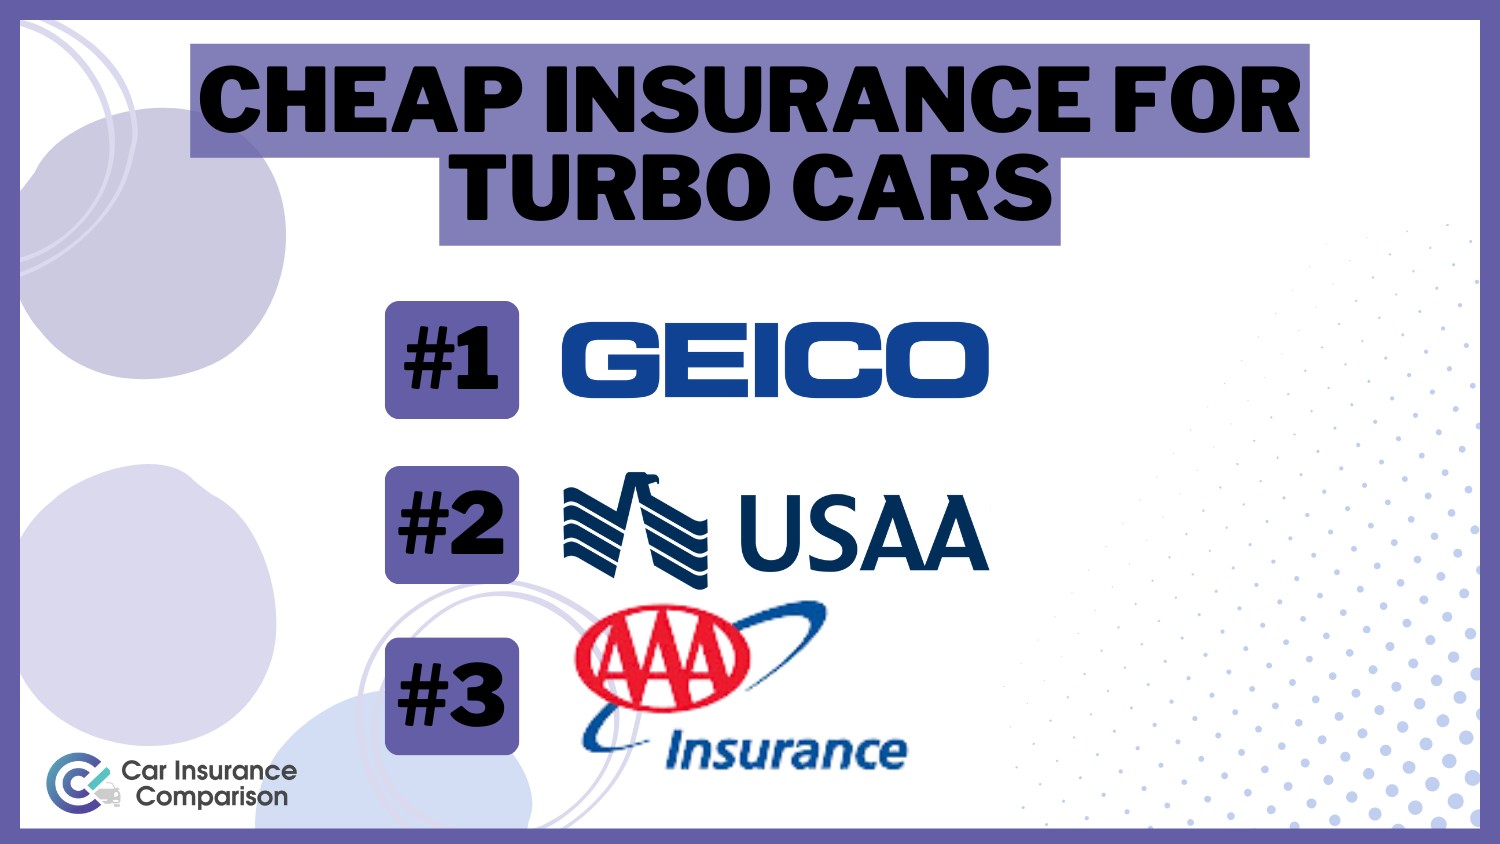 Cheap Insurance for Turbo Cars: Geico, USAA, and AAA